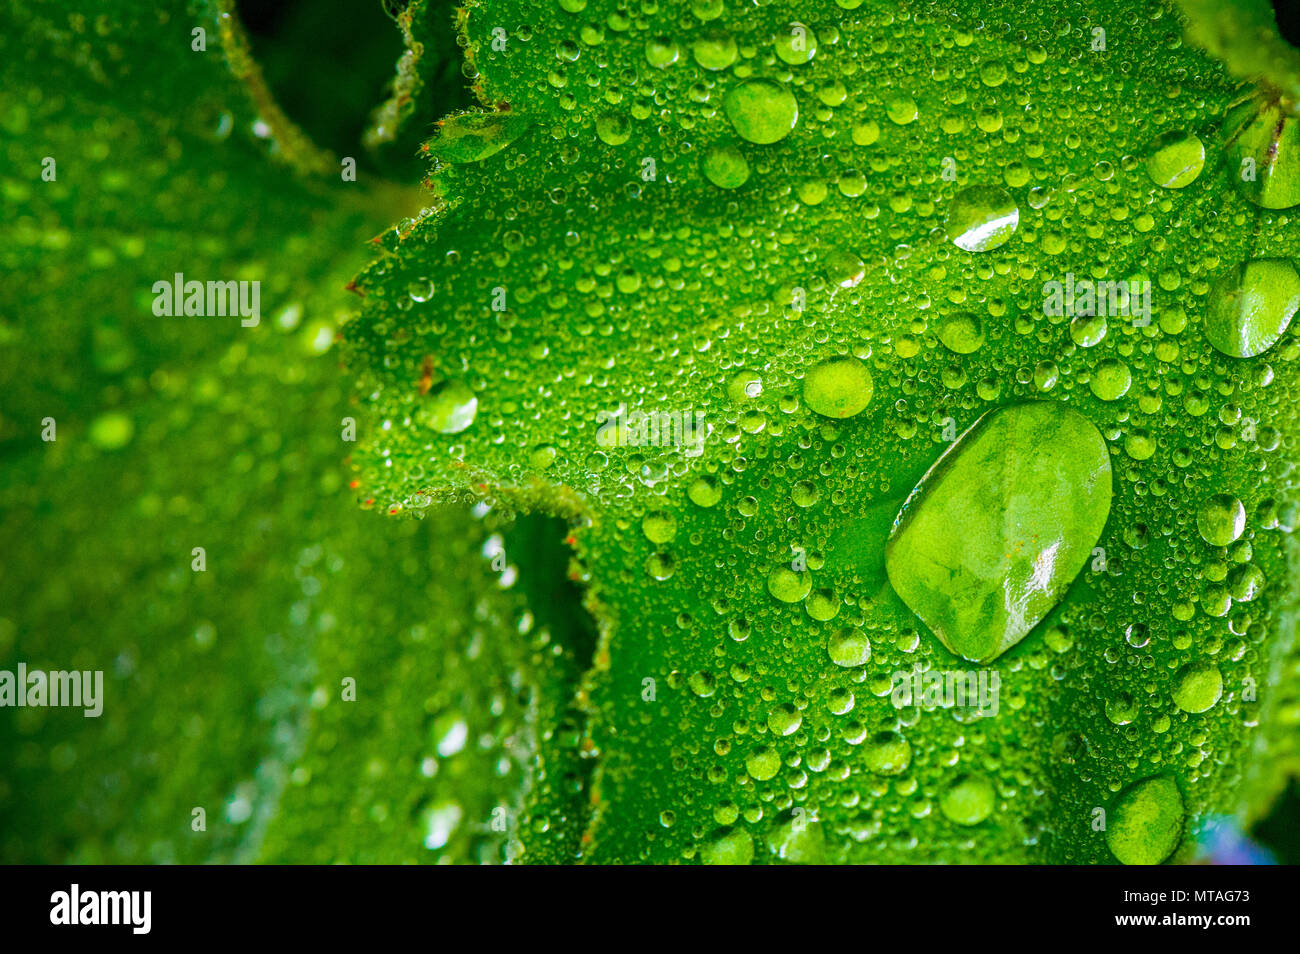 Green leaves with rain droplets. Stock Photo